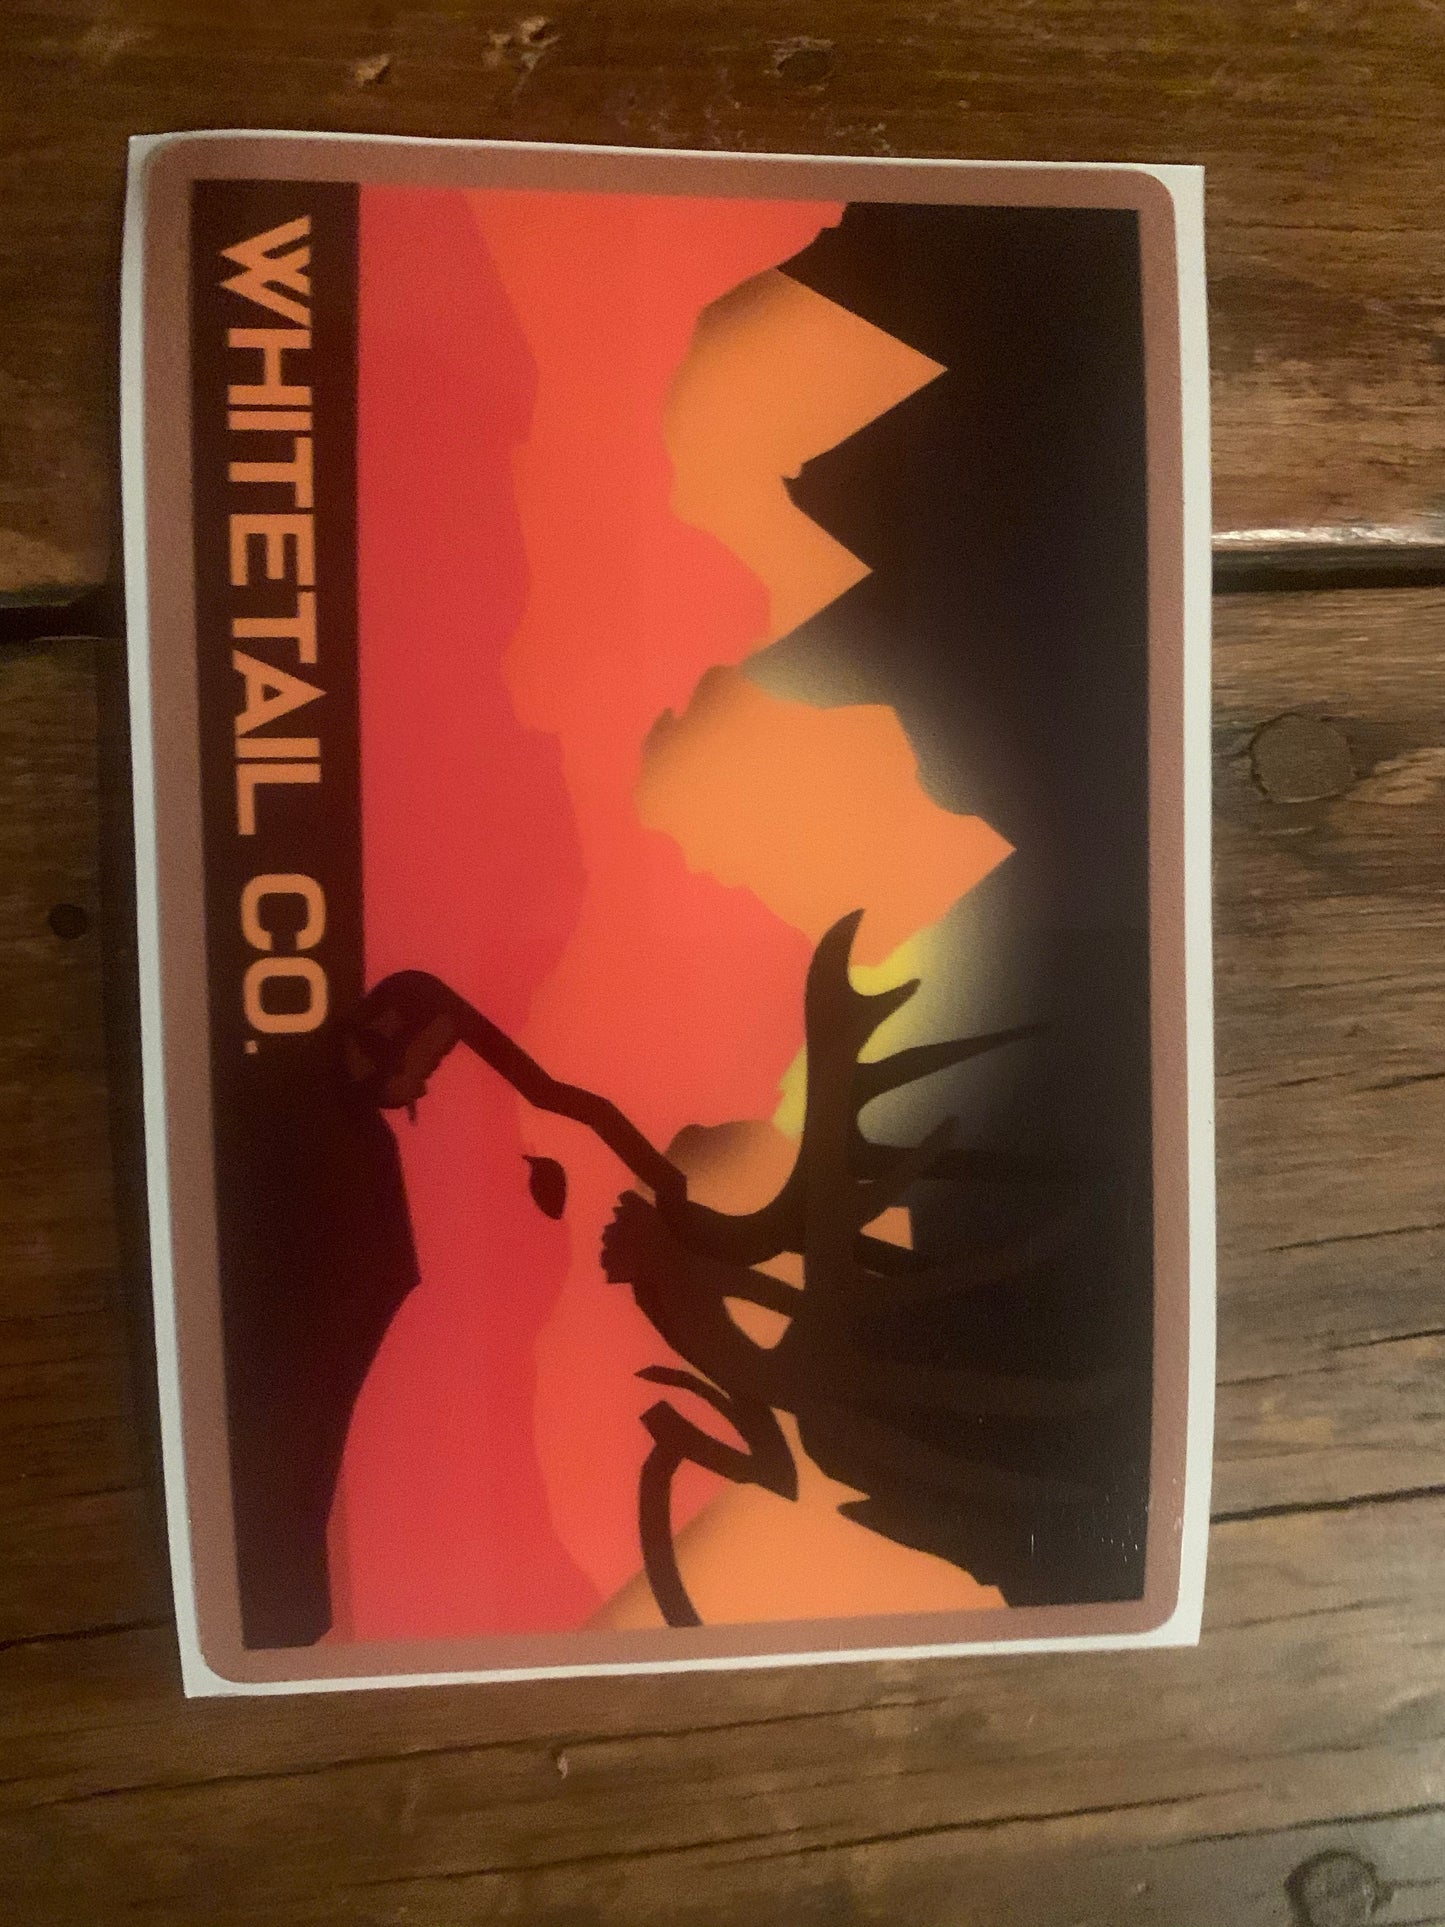 Whitetail Sunset 5” Decal